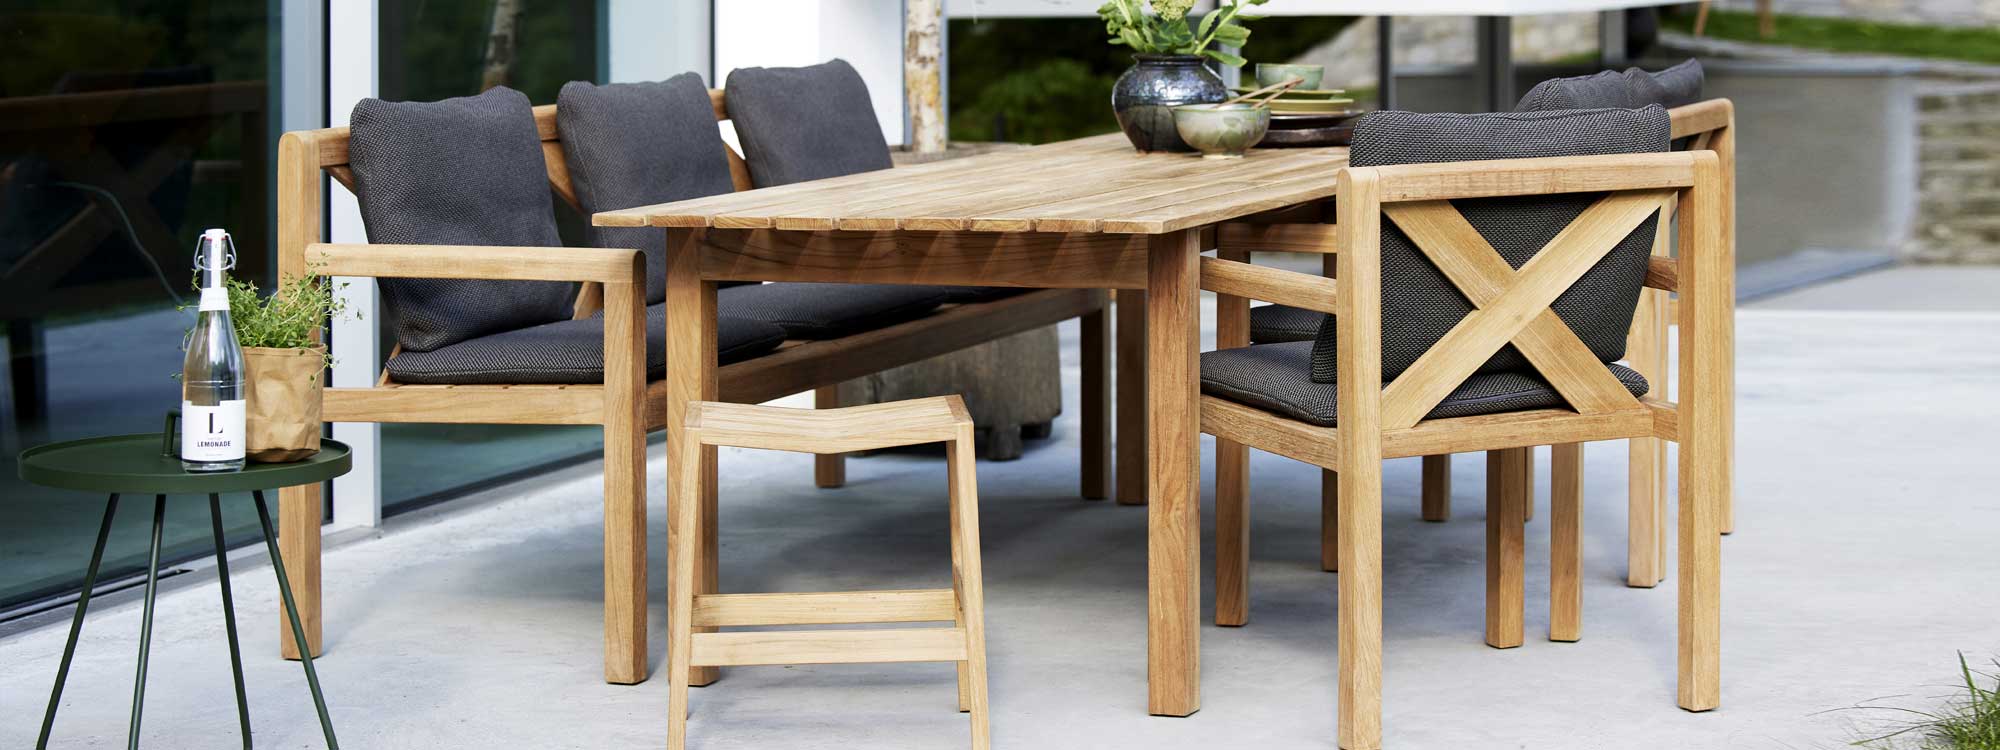 Image of Grace teak dining table, chairs and bench with grey Focus cushions by Cane-line